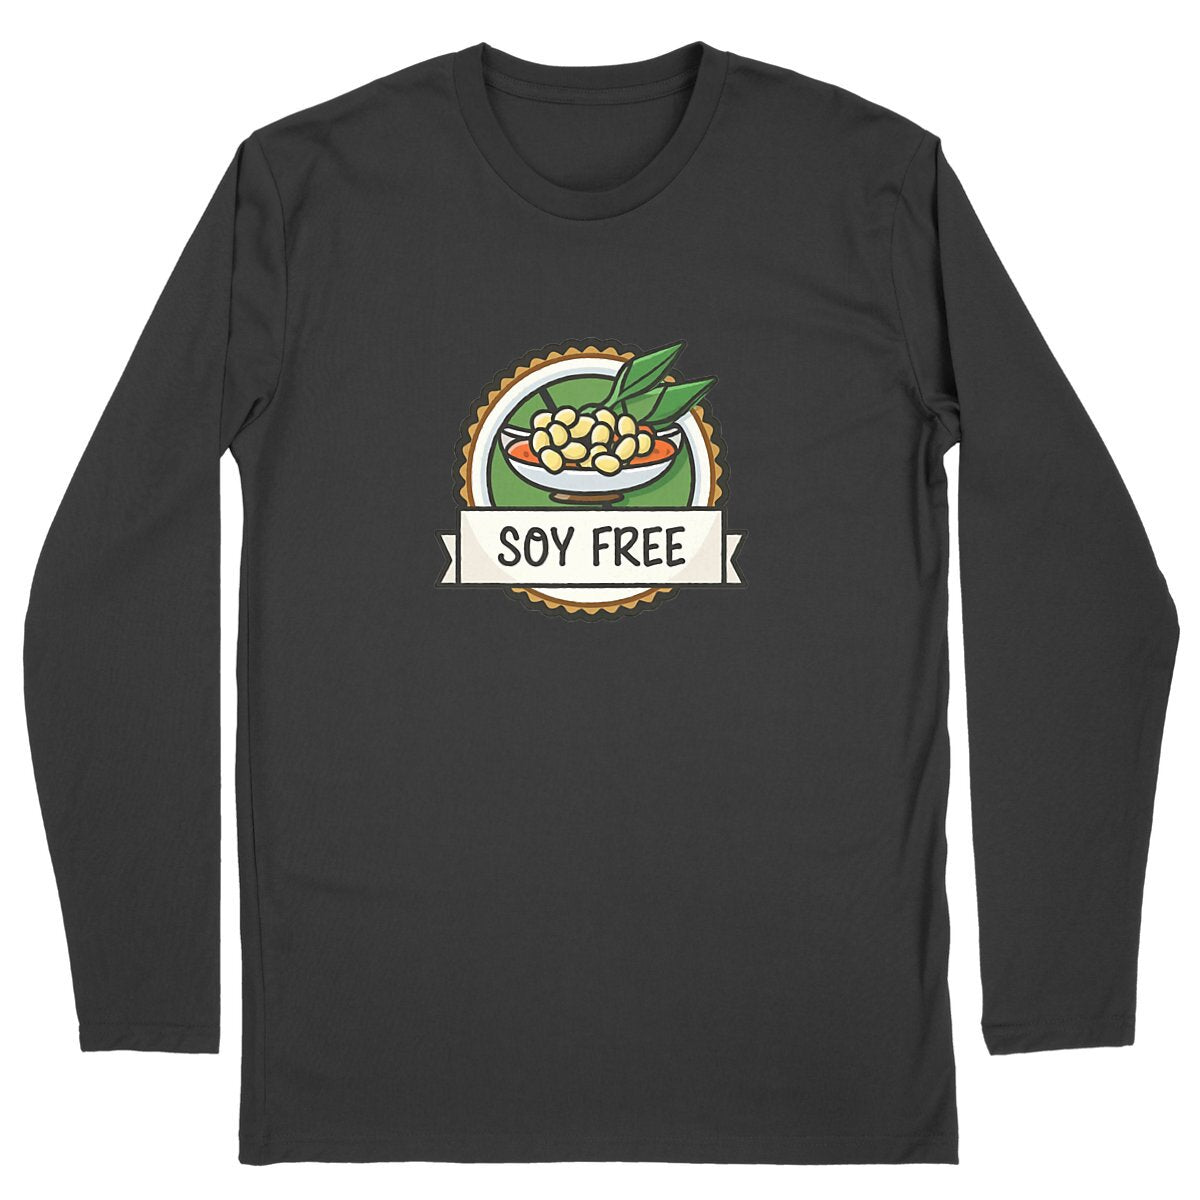 Soy Free Bowl Long Sleeve Organic Cotton Graphic Mens Shirt | Hypoallergenic - Allergy Friendly - Naturally Free